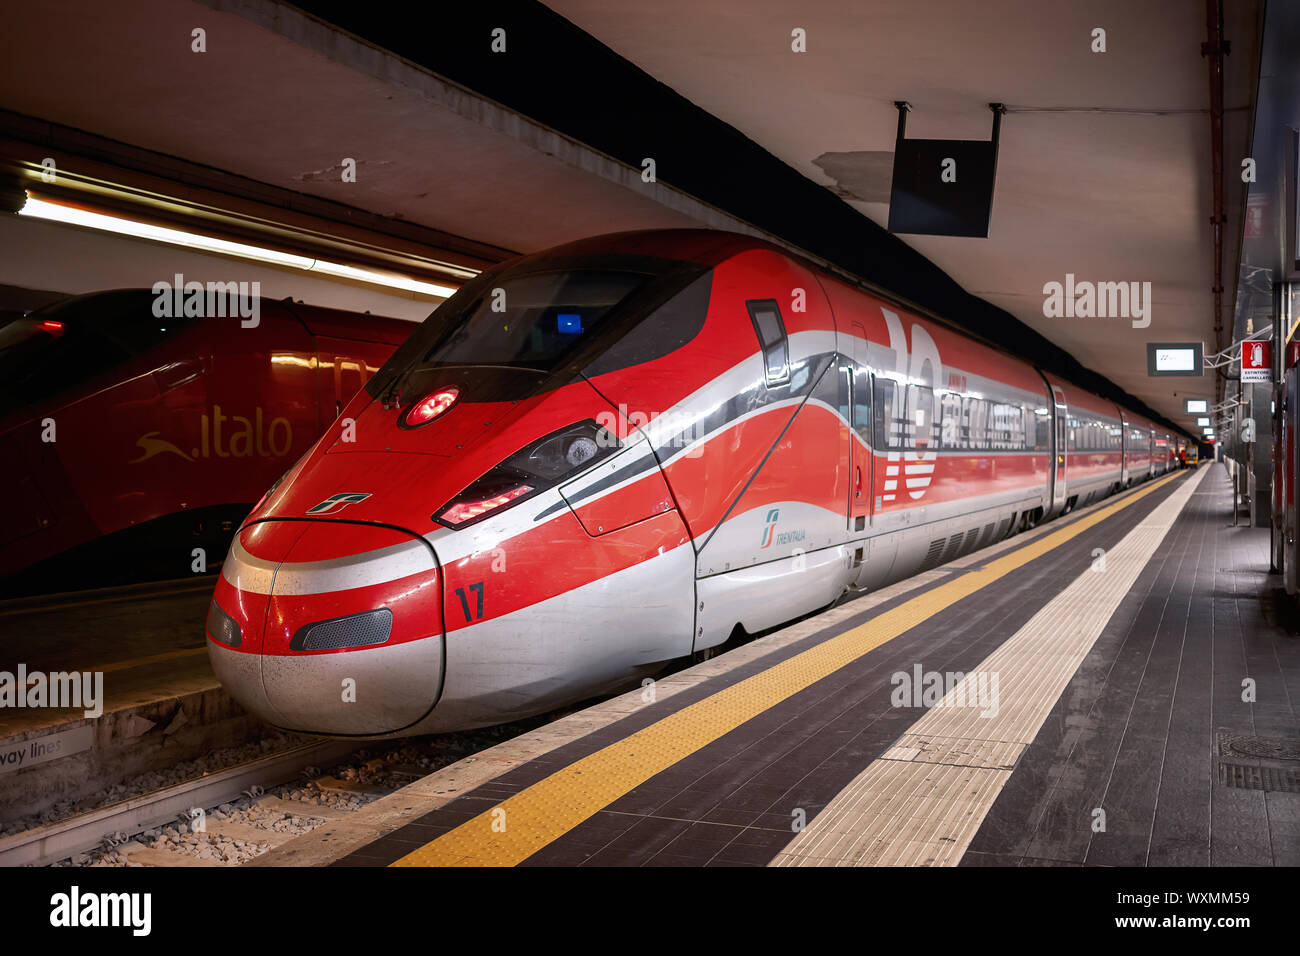 Naples, Italy - September 07, 2019: two high-speed trains of different transport companies, stopped on the platform of the central railway station. Stock Photo